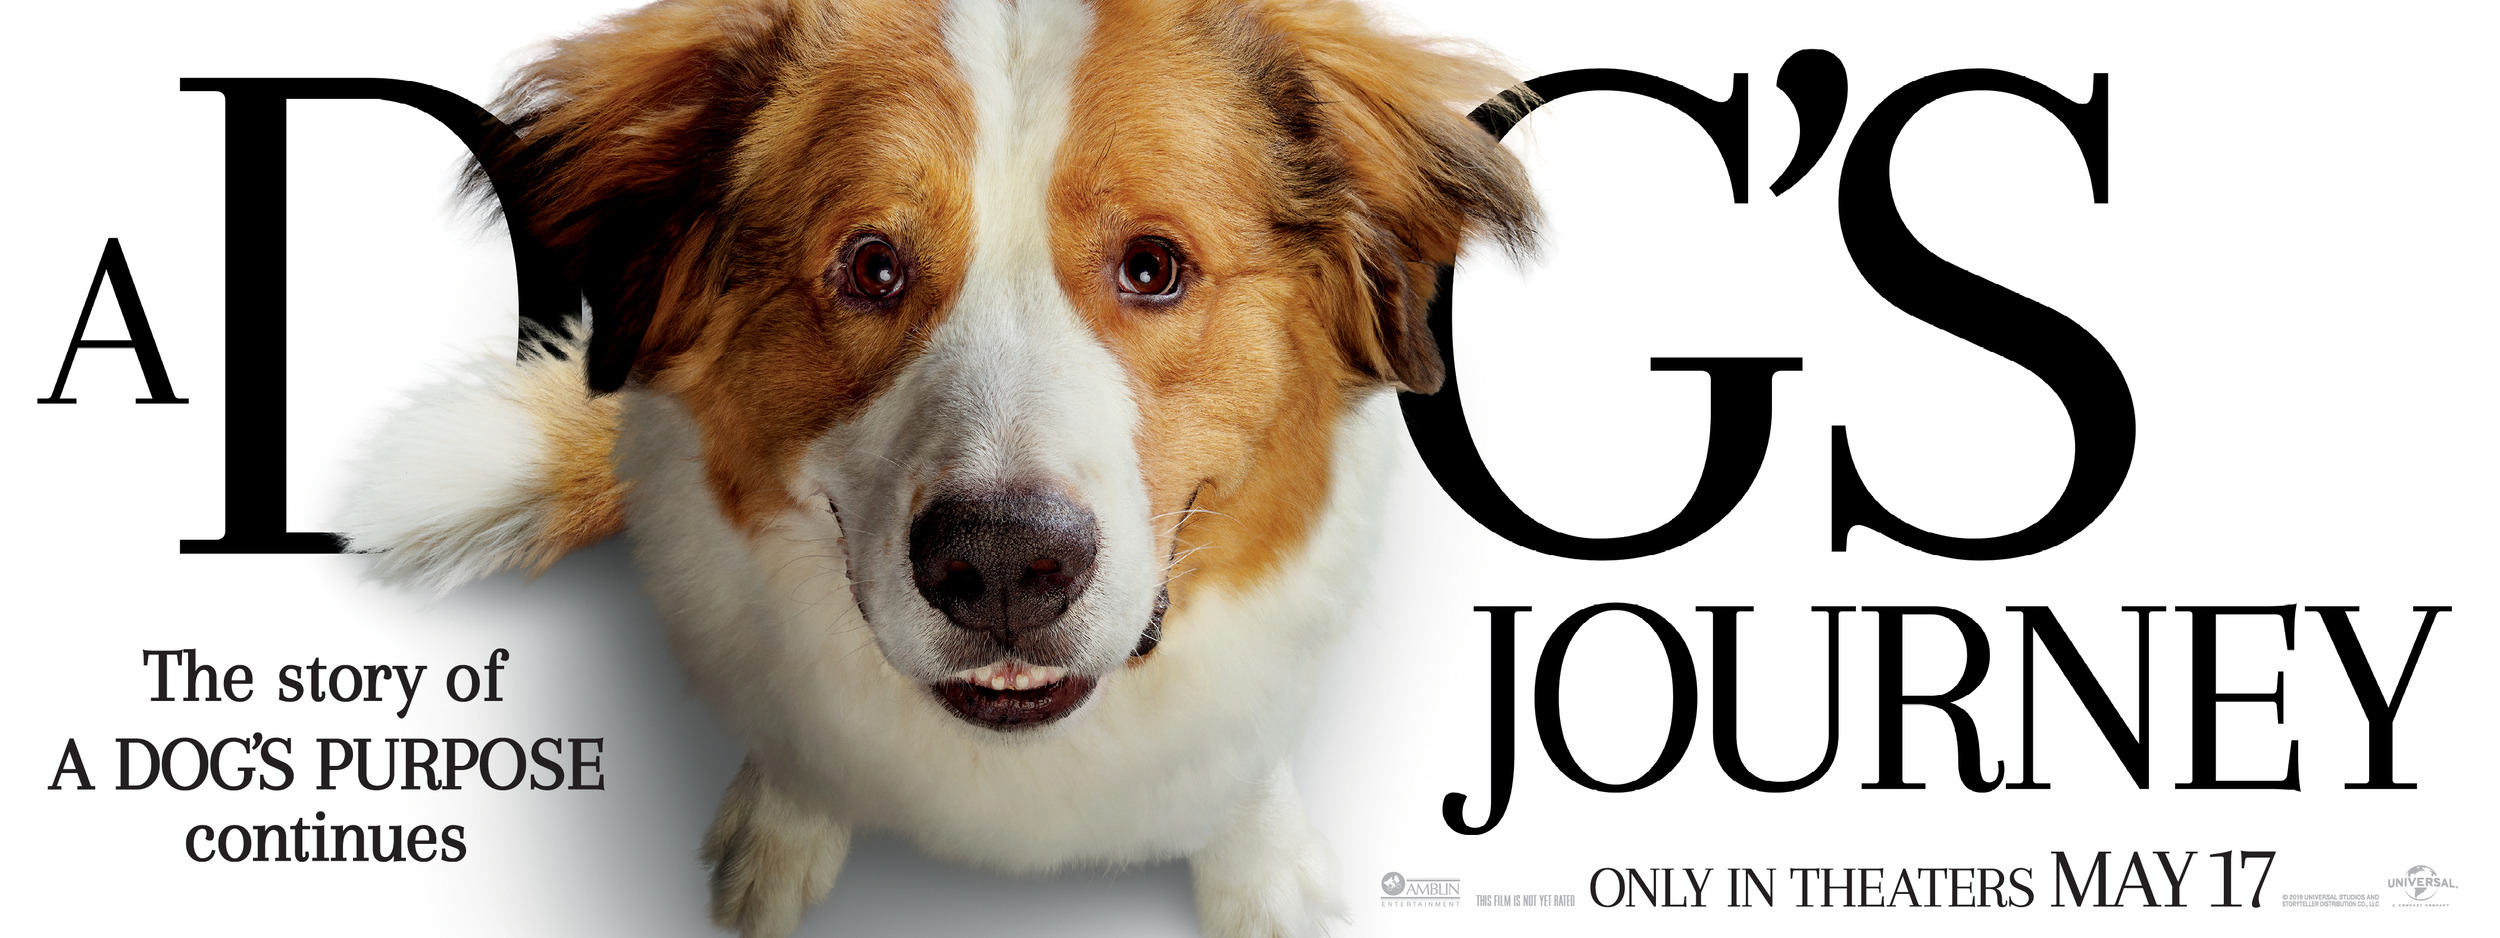 Mega Sized Movie Poster Image for A Dog's Journey (#6 of 11)